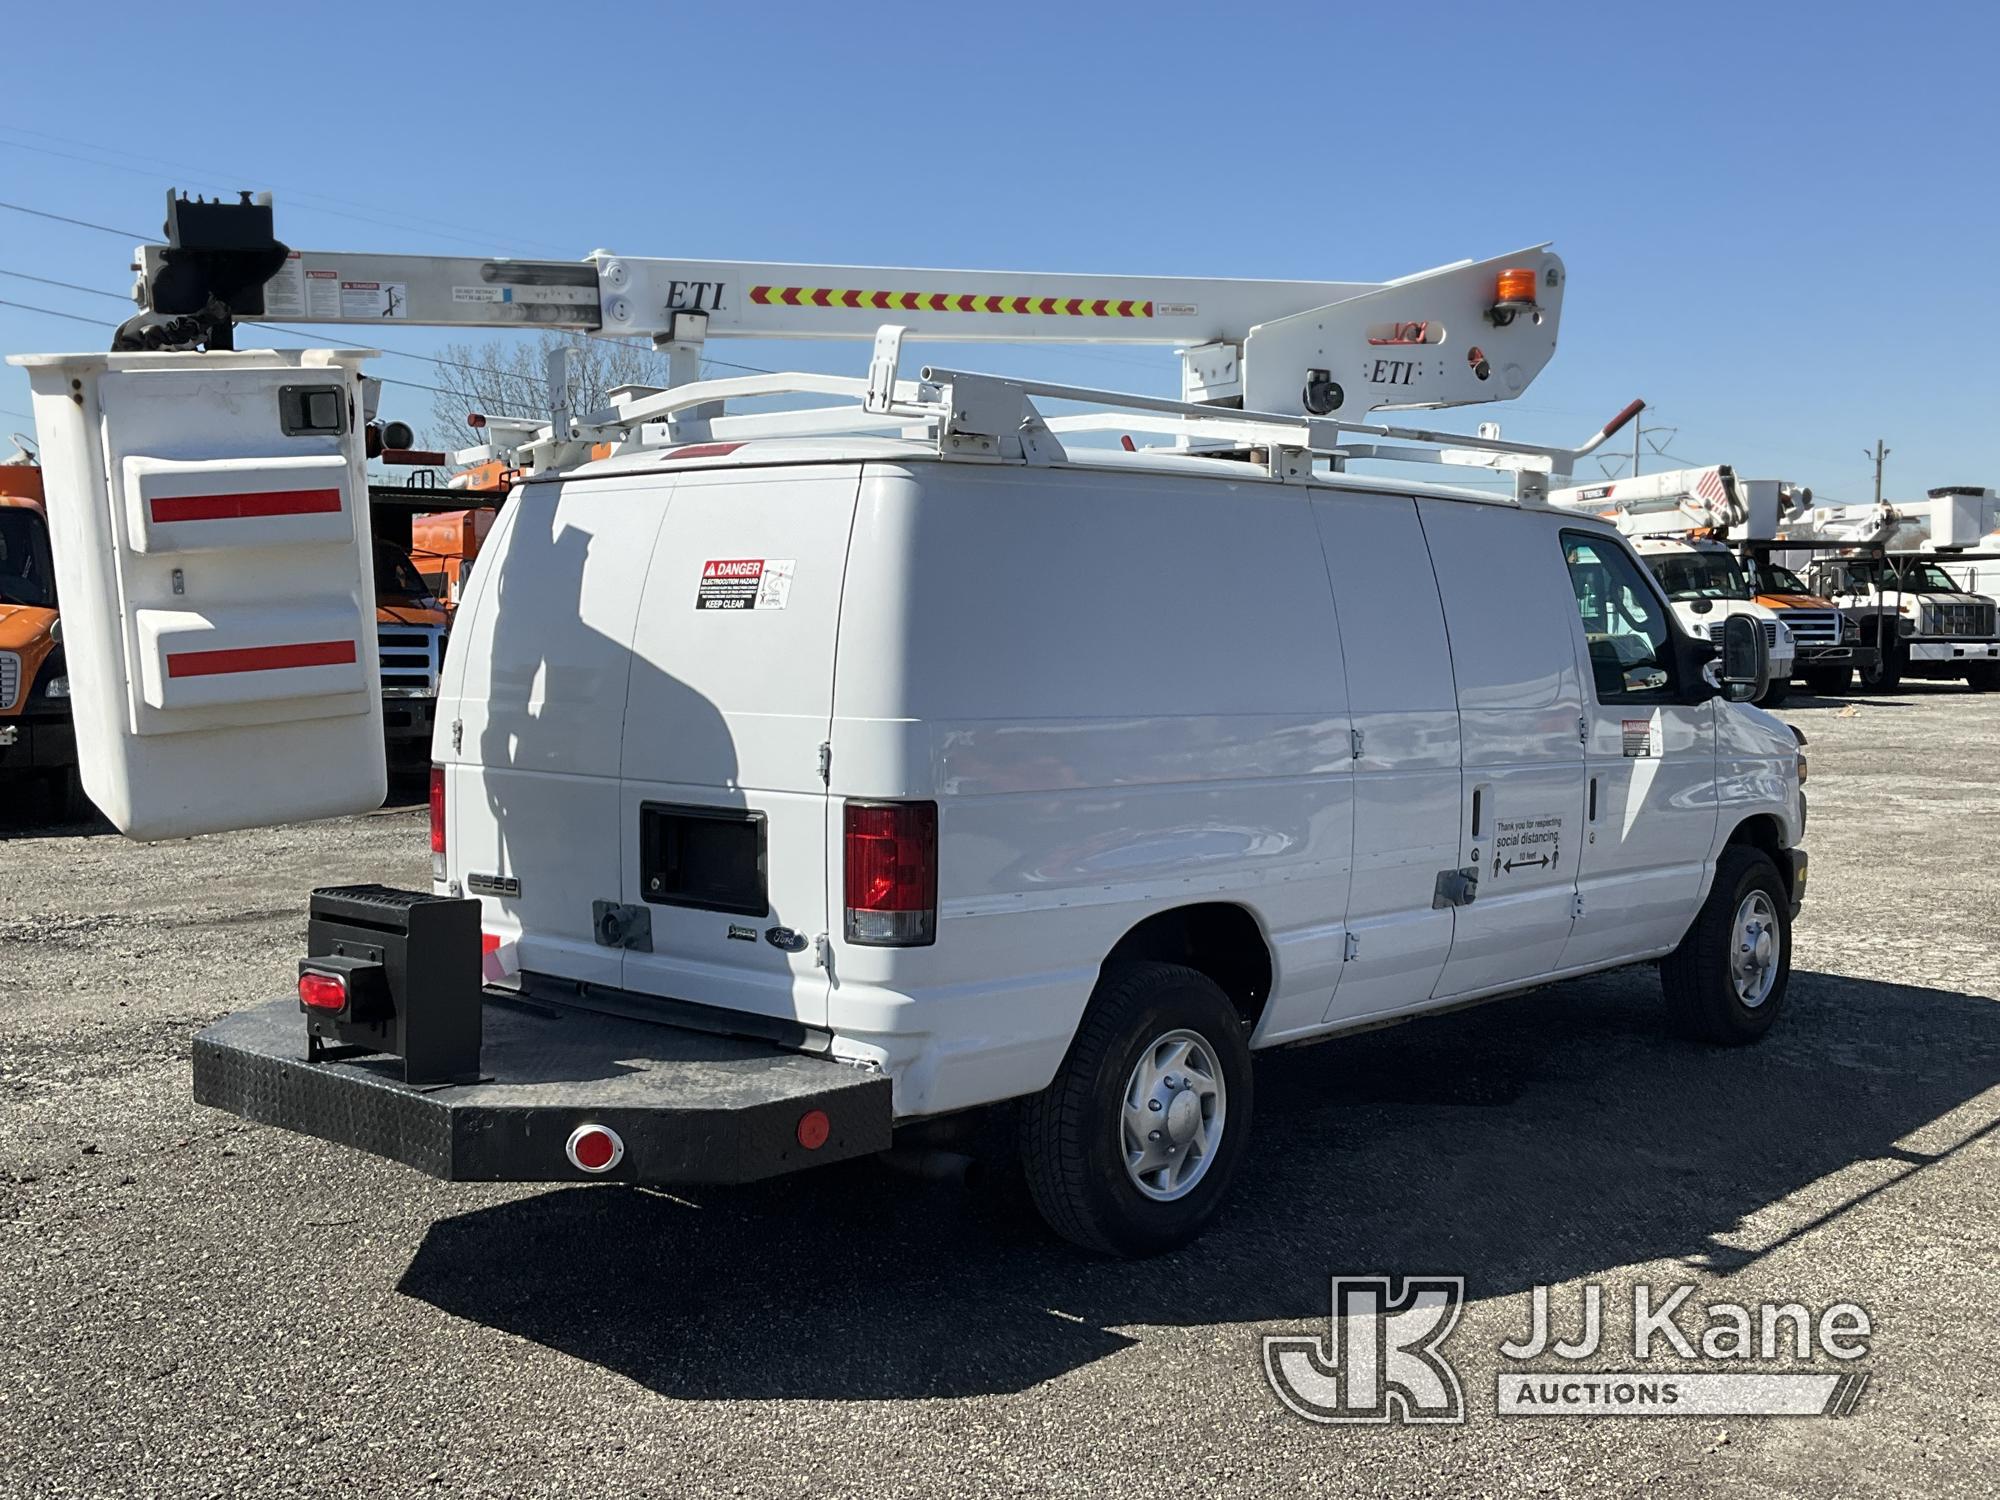 (Plymouth Meeting, PA) ETI ETT29-SNV, Telescopic Non-Insulated Bucket Van mounted on 2010 Ford E350